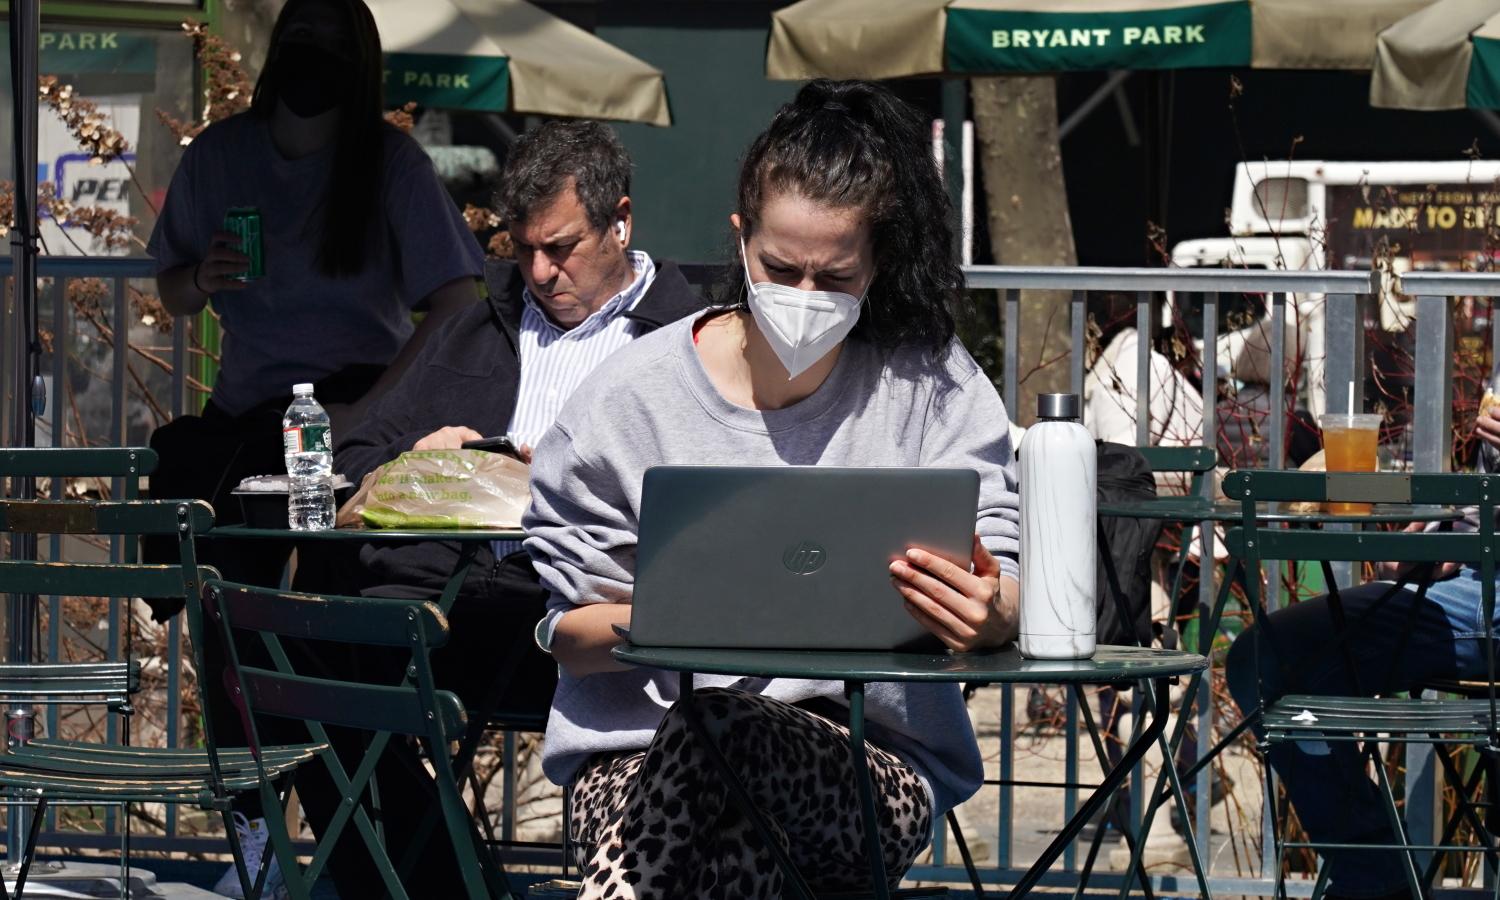 A person wearing a protective mask uses a laptop computer in Bryant Park on March 23, 2021, in New York City. Cybercriminals have taken advantage of remote-based employees who spend much of their time accessing cloud-based work applications to distribute malware via a technique known as HTML smuggling. (Cindy Ord/Getty Images)